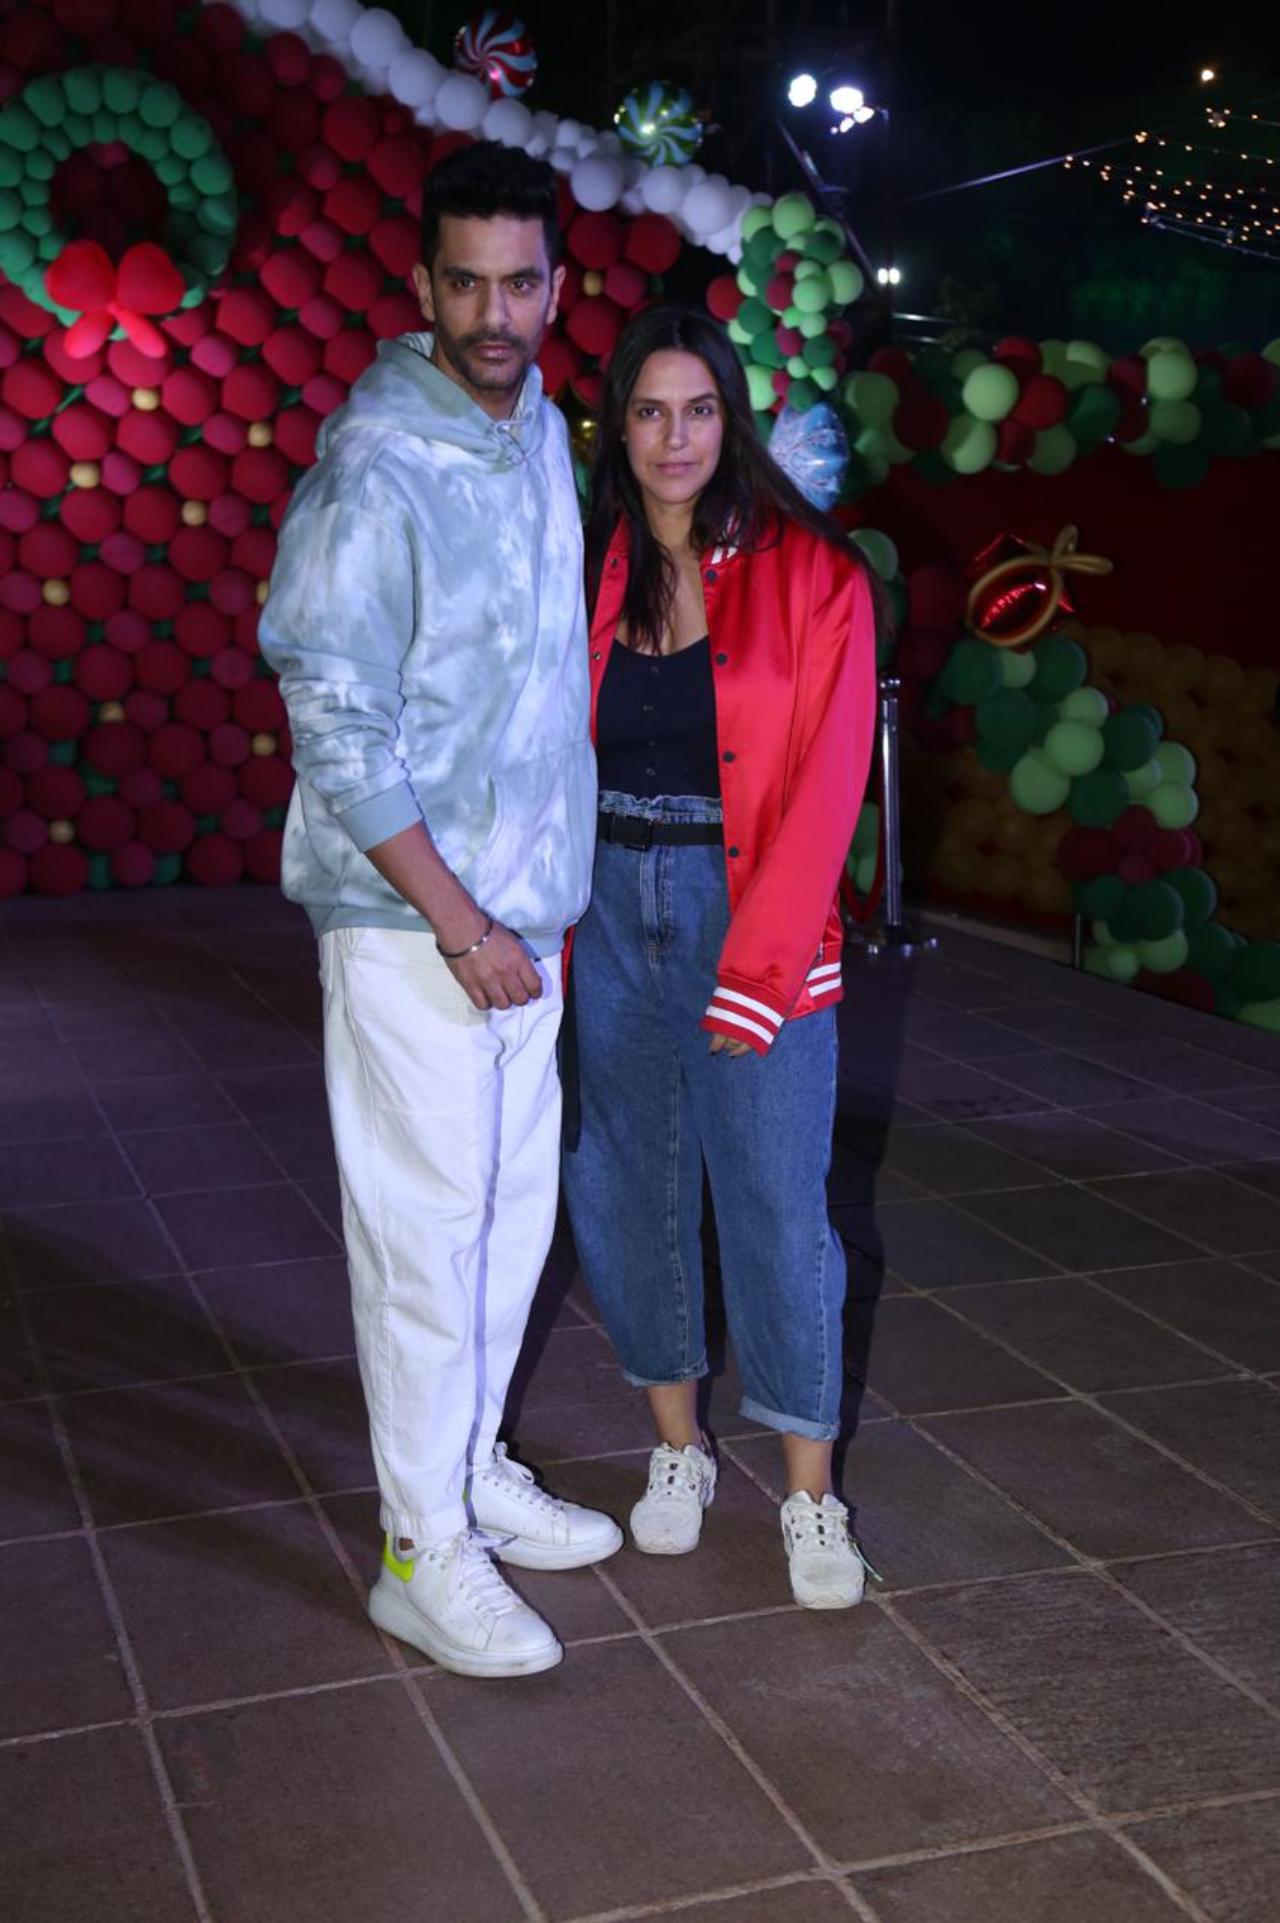 Bollywood couple Angad Bedi and Neha Dhupia arrived at the party in casual outfits. Angad opted for a blue hoodie, whereas Neha donned a red varsity jacket over a black top